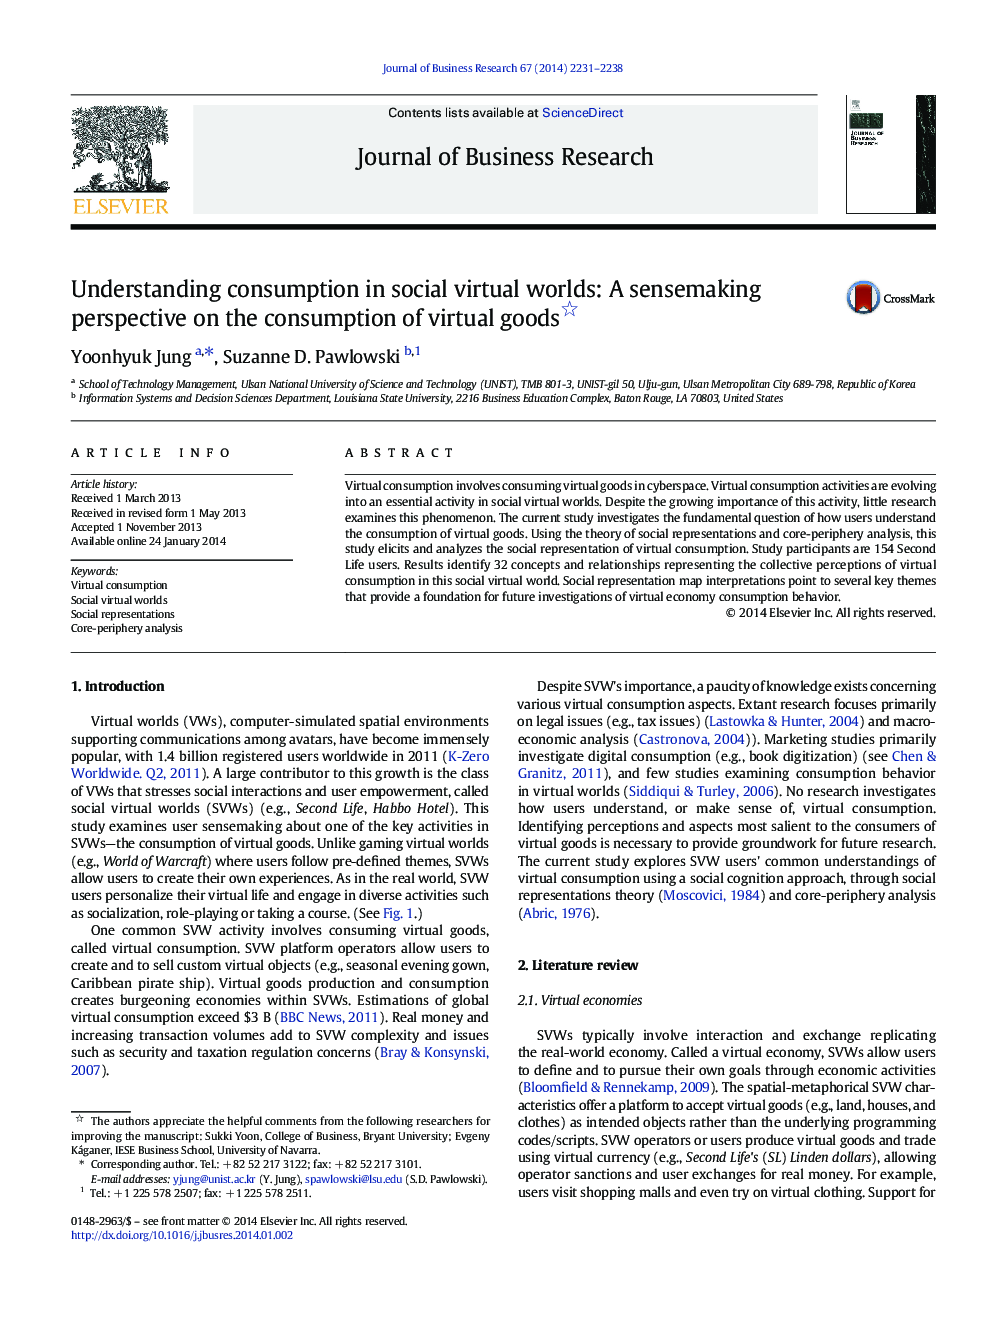 Understanding consumption in social virtual worlds: A sensemaking perspective on the consumption of virtual goods 